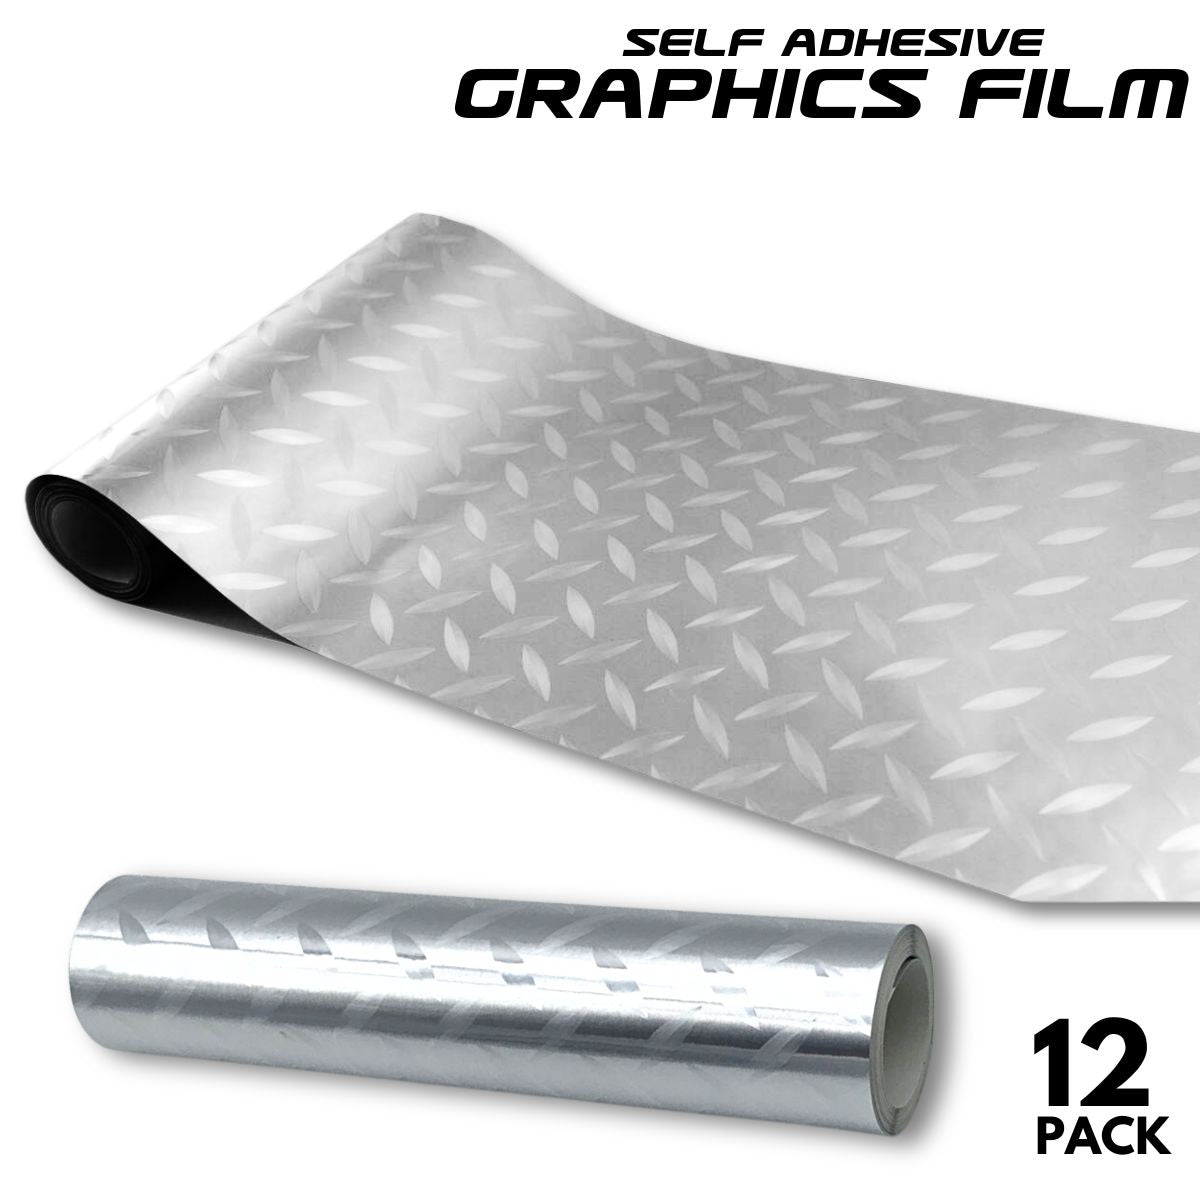 (12 Pack) Self Adhesive Graphics Film, 8" x 4.2metres - South East Clearance Centre